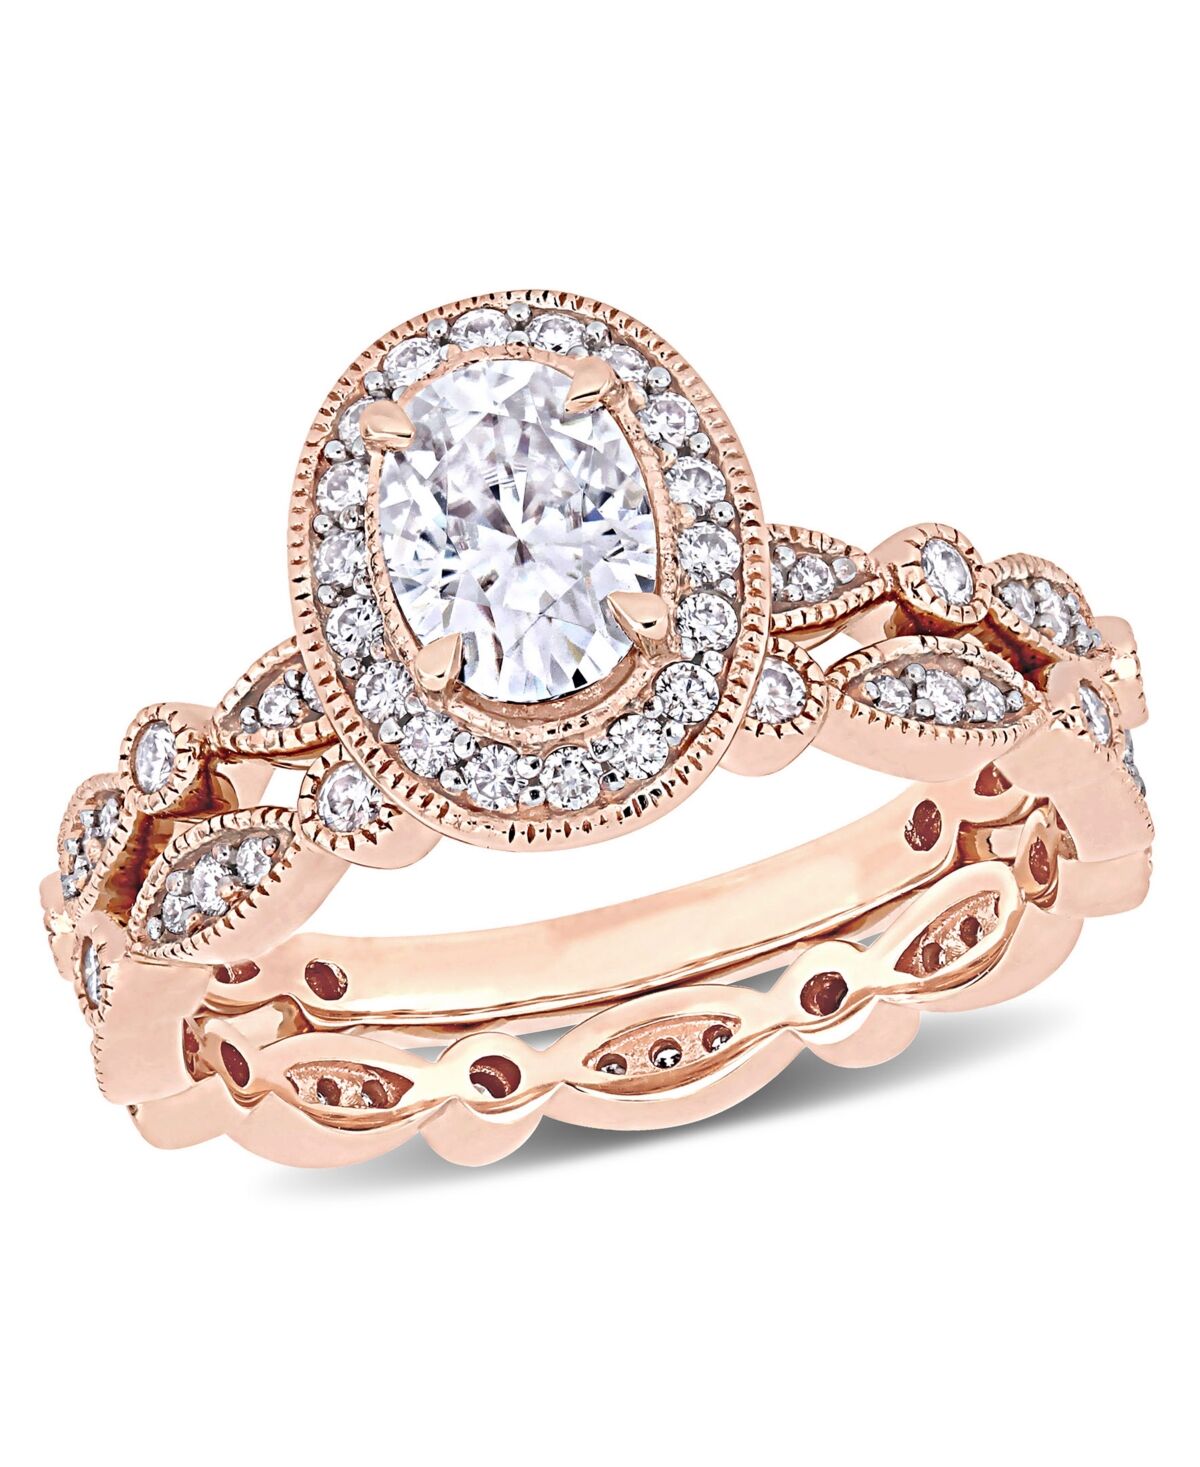 Macy's Moissanite in 10K Gold Vintage-Like Halo Infinity Bridal Ring Set, 2 Piece - Rose gold